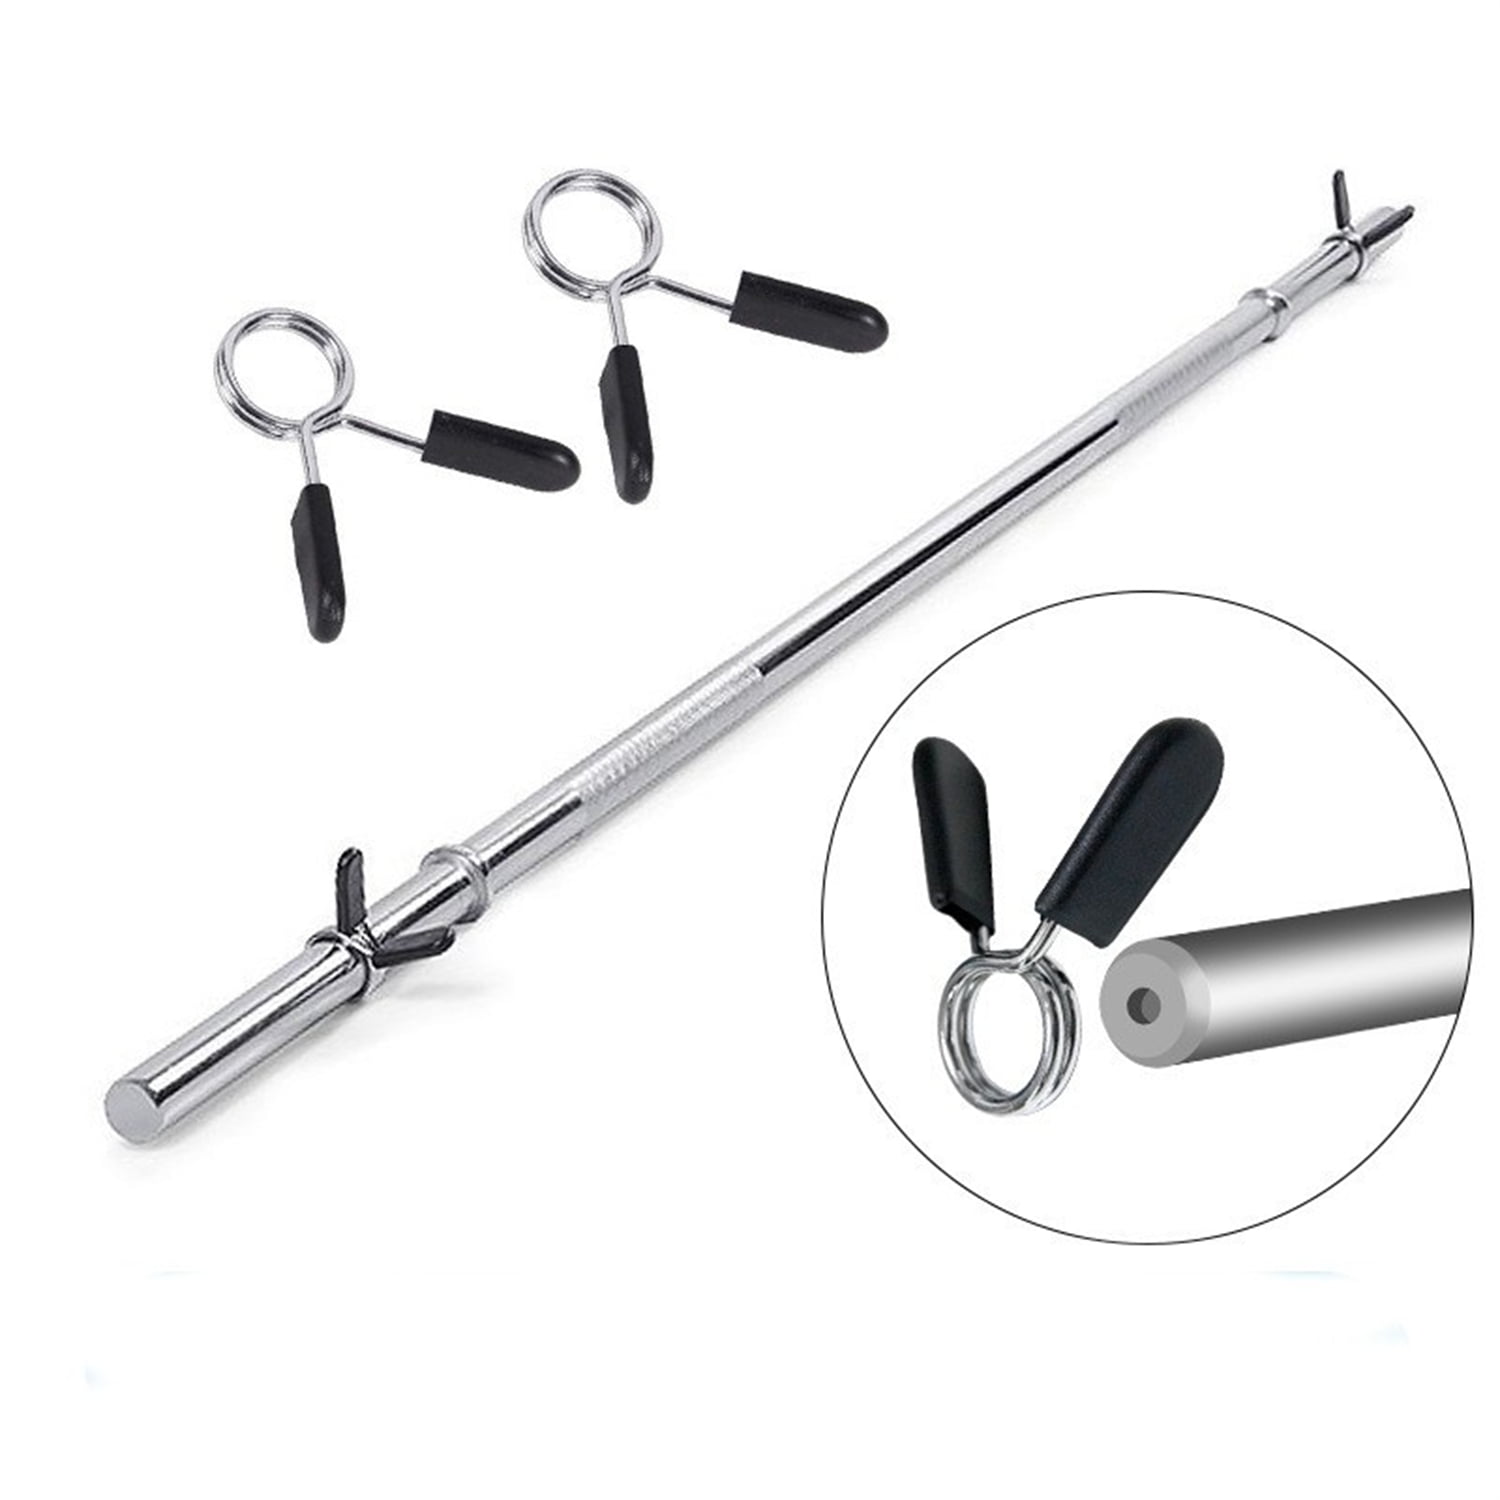 Details about   NEW Olympic Chrome Bar Weight Lifting Barbell Rod for Workout Gym Training Black 